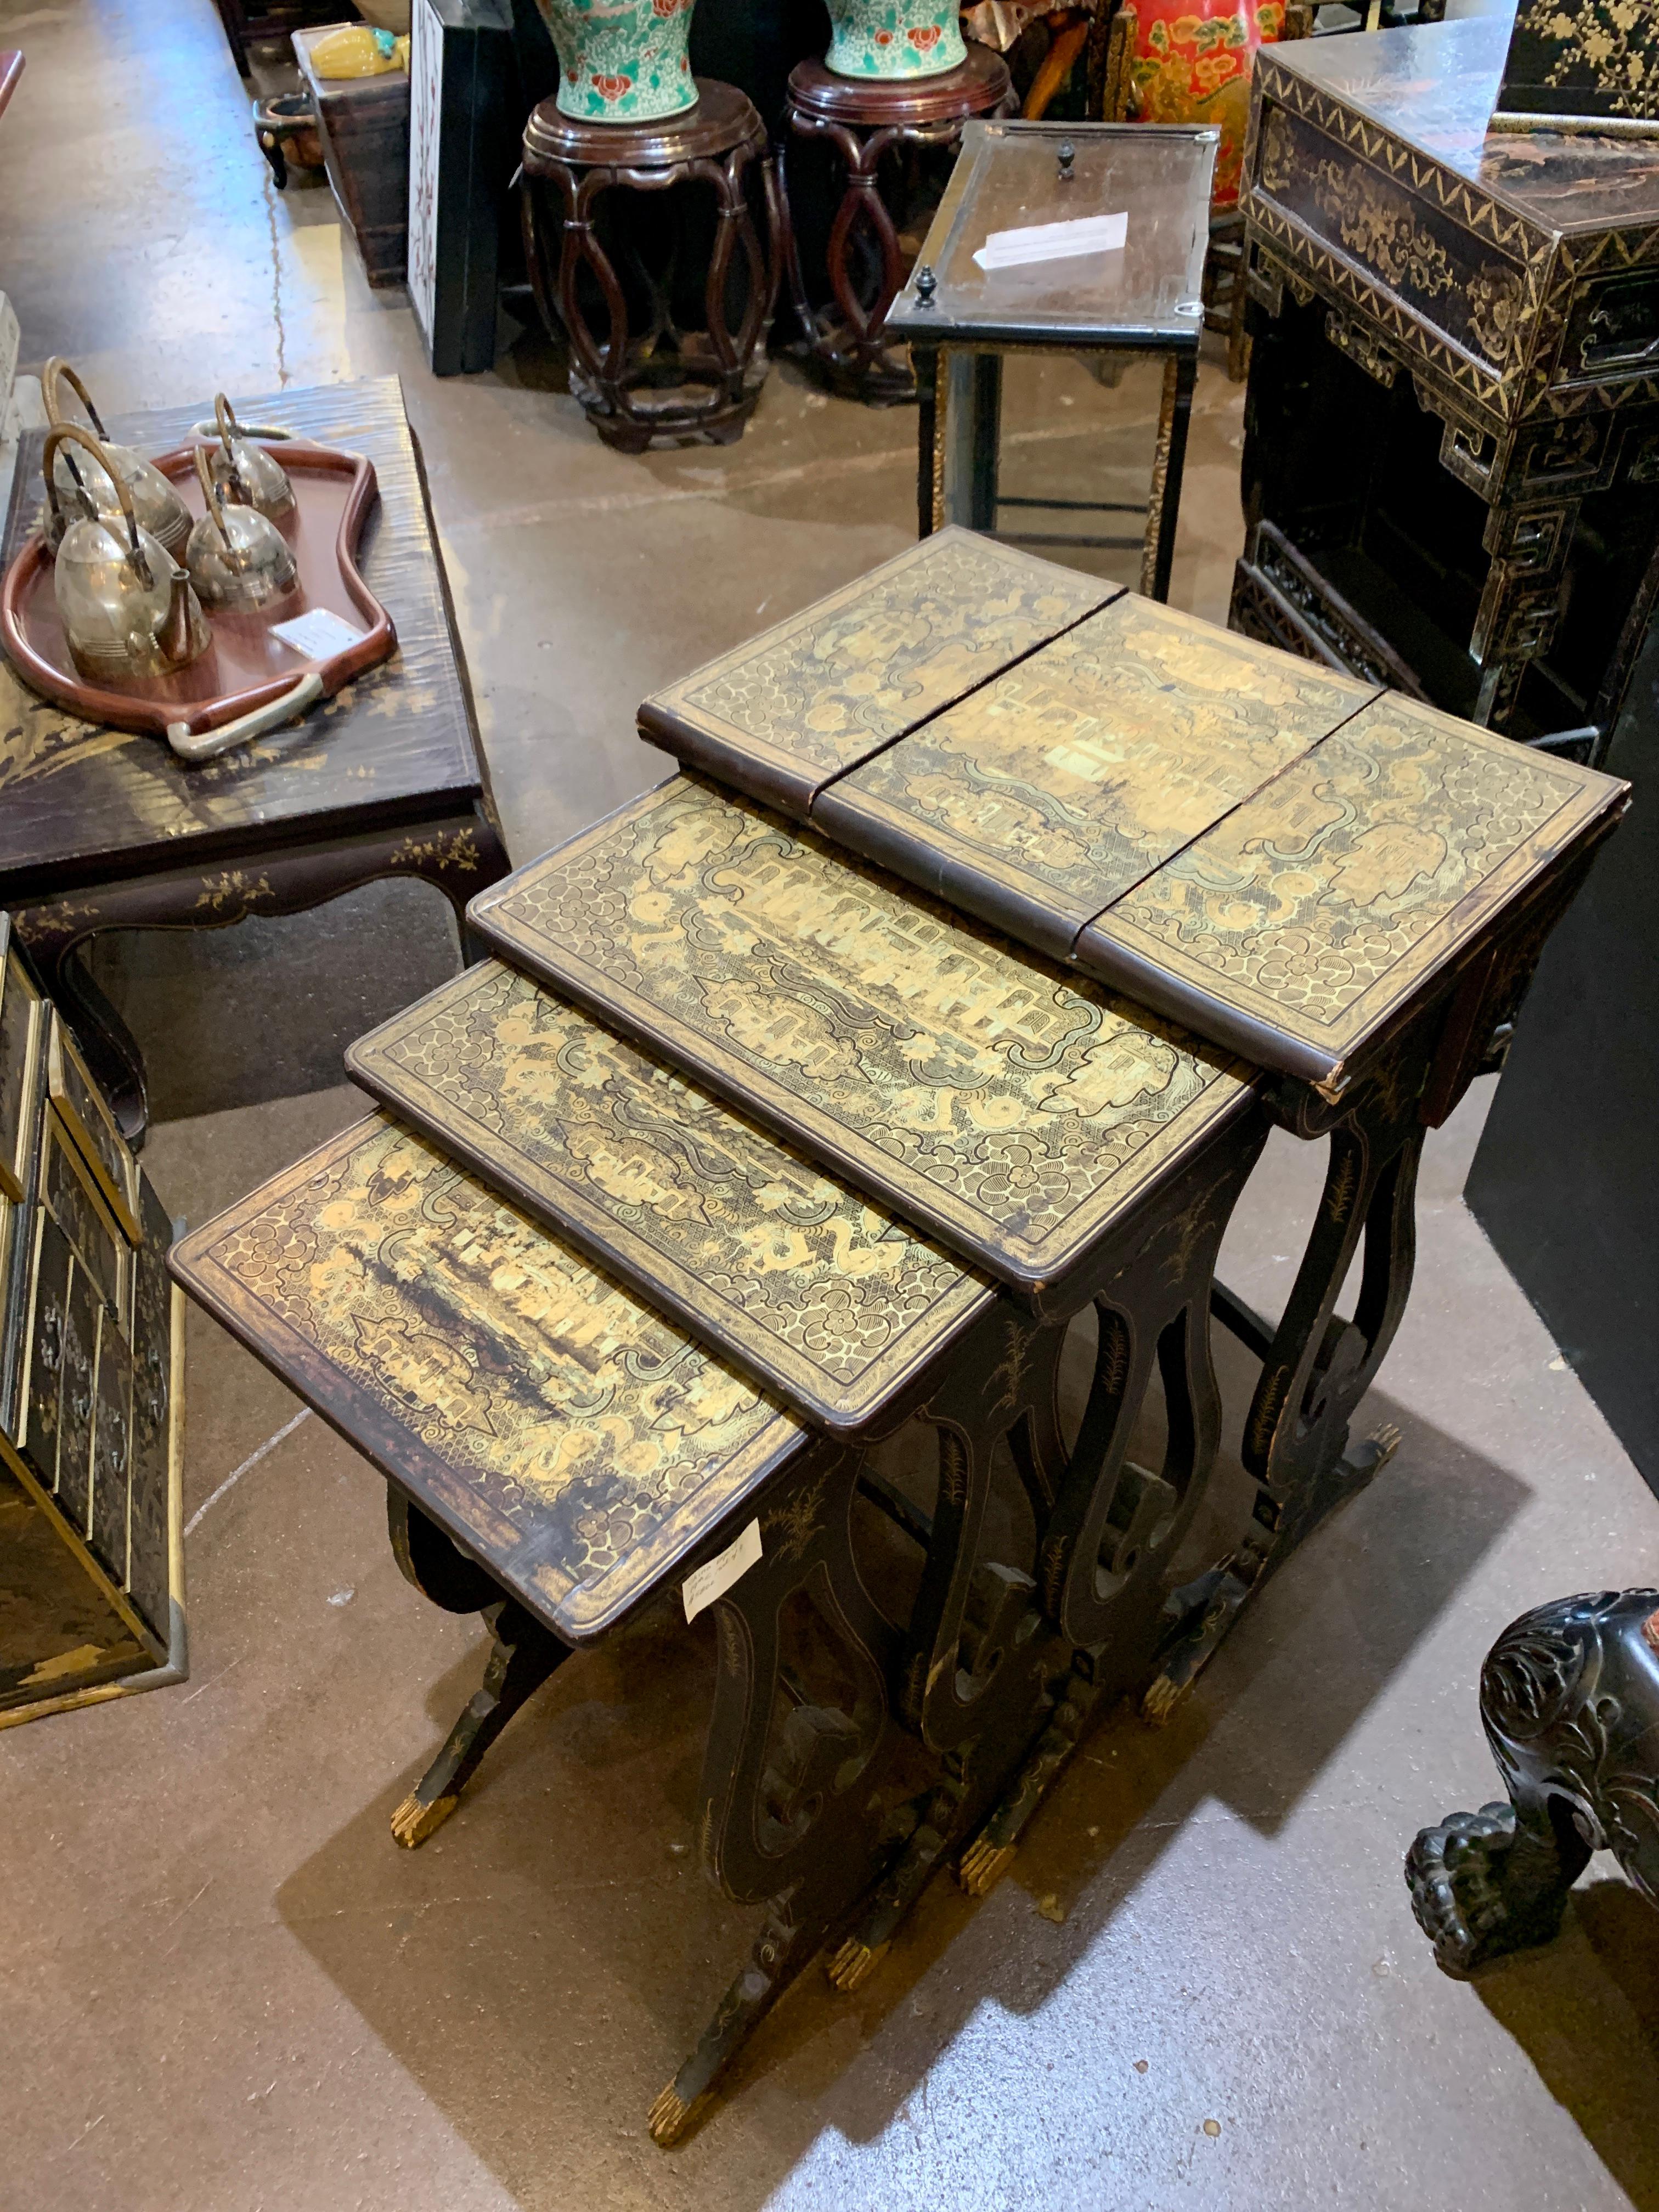 An exquisite and unusual set of four Chinese export black lacquer and gilt painted nesting tables, early to mid 19th century, China. The largest table top opens to serve as a games table.

This elegant set of four nesting tables crafted in black